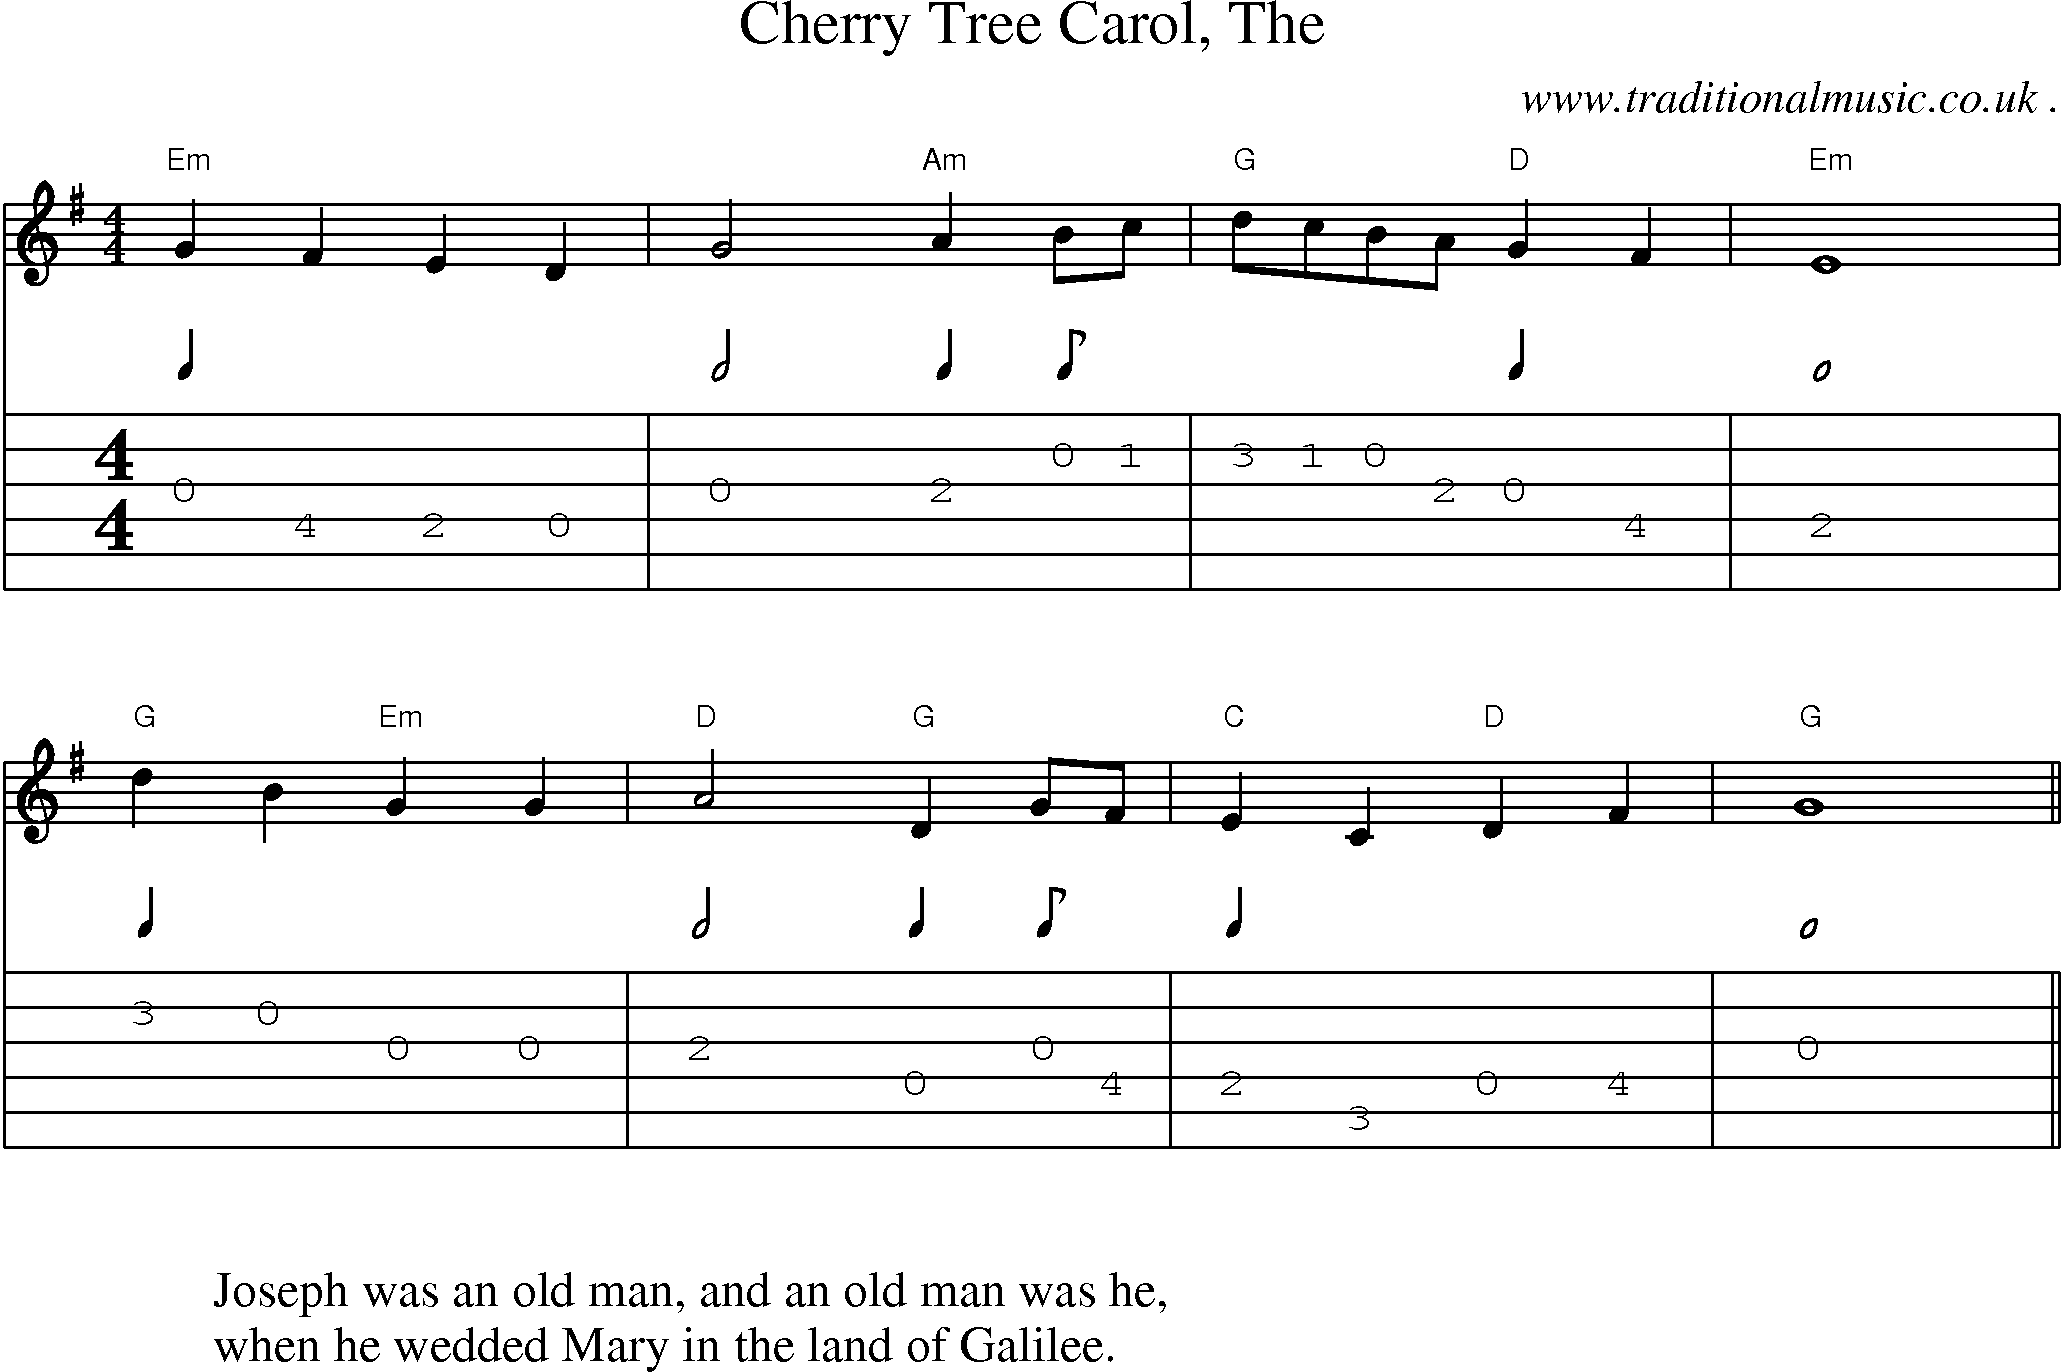 Music Score and Guitar Tabs for Cherry Tree Carol The